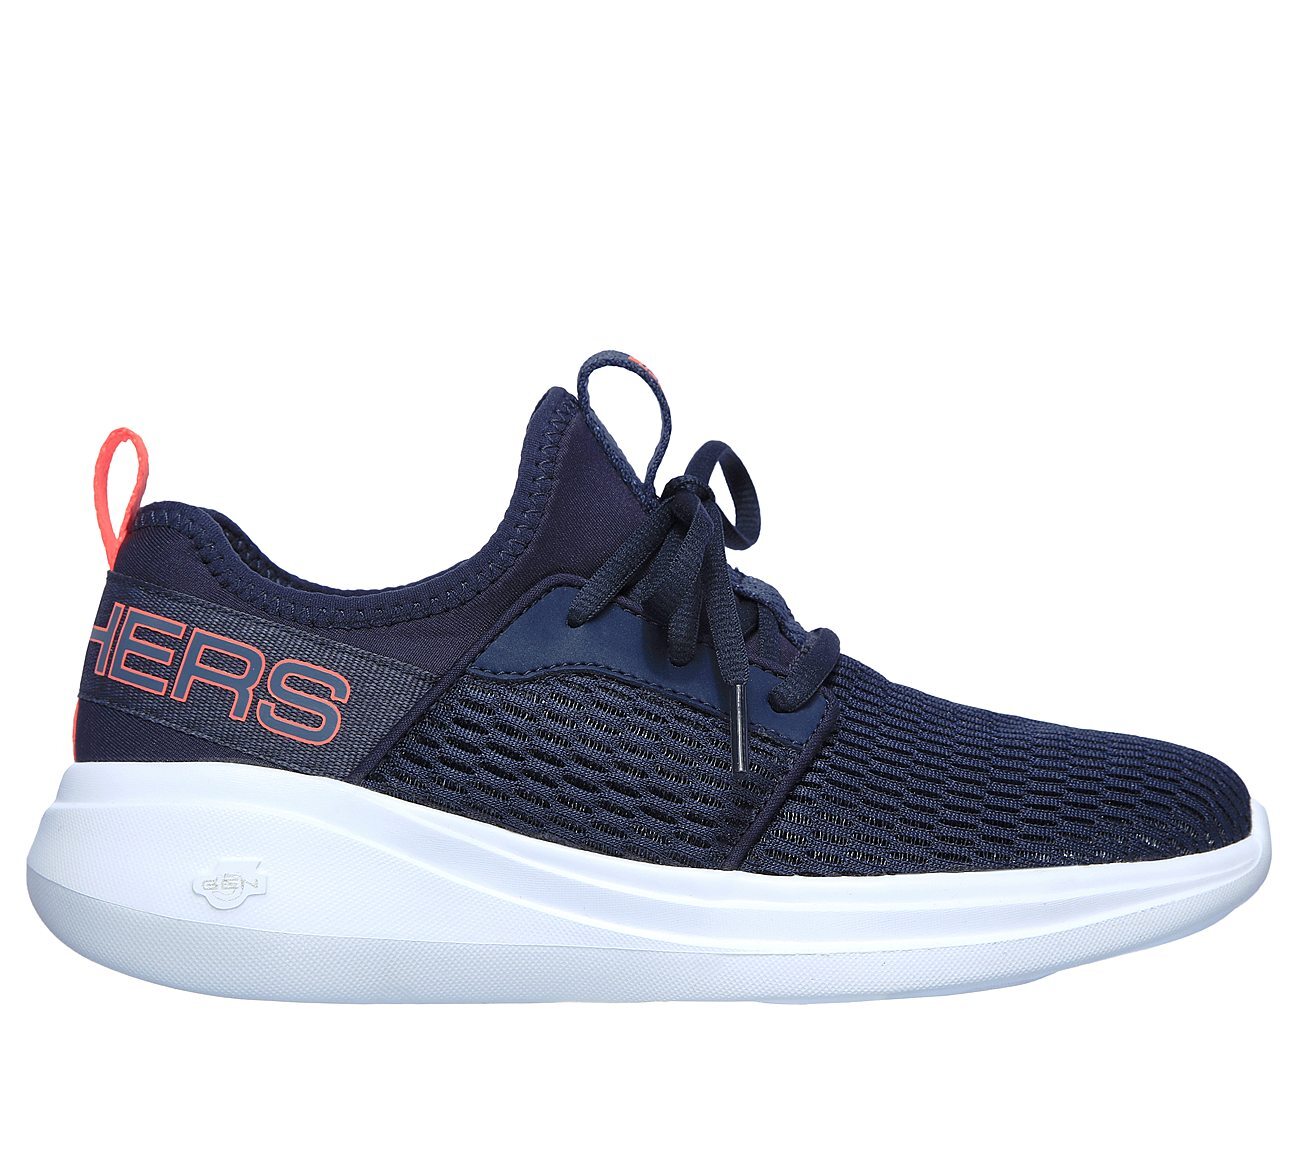 GO RUN FAST - GLIMMER, NAVY/CORAL Footwear Lateral View